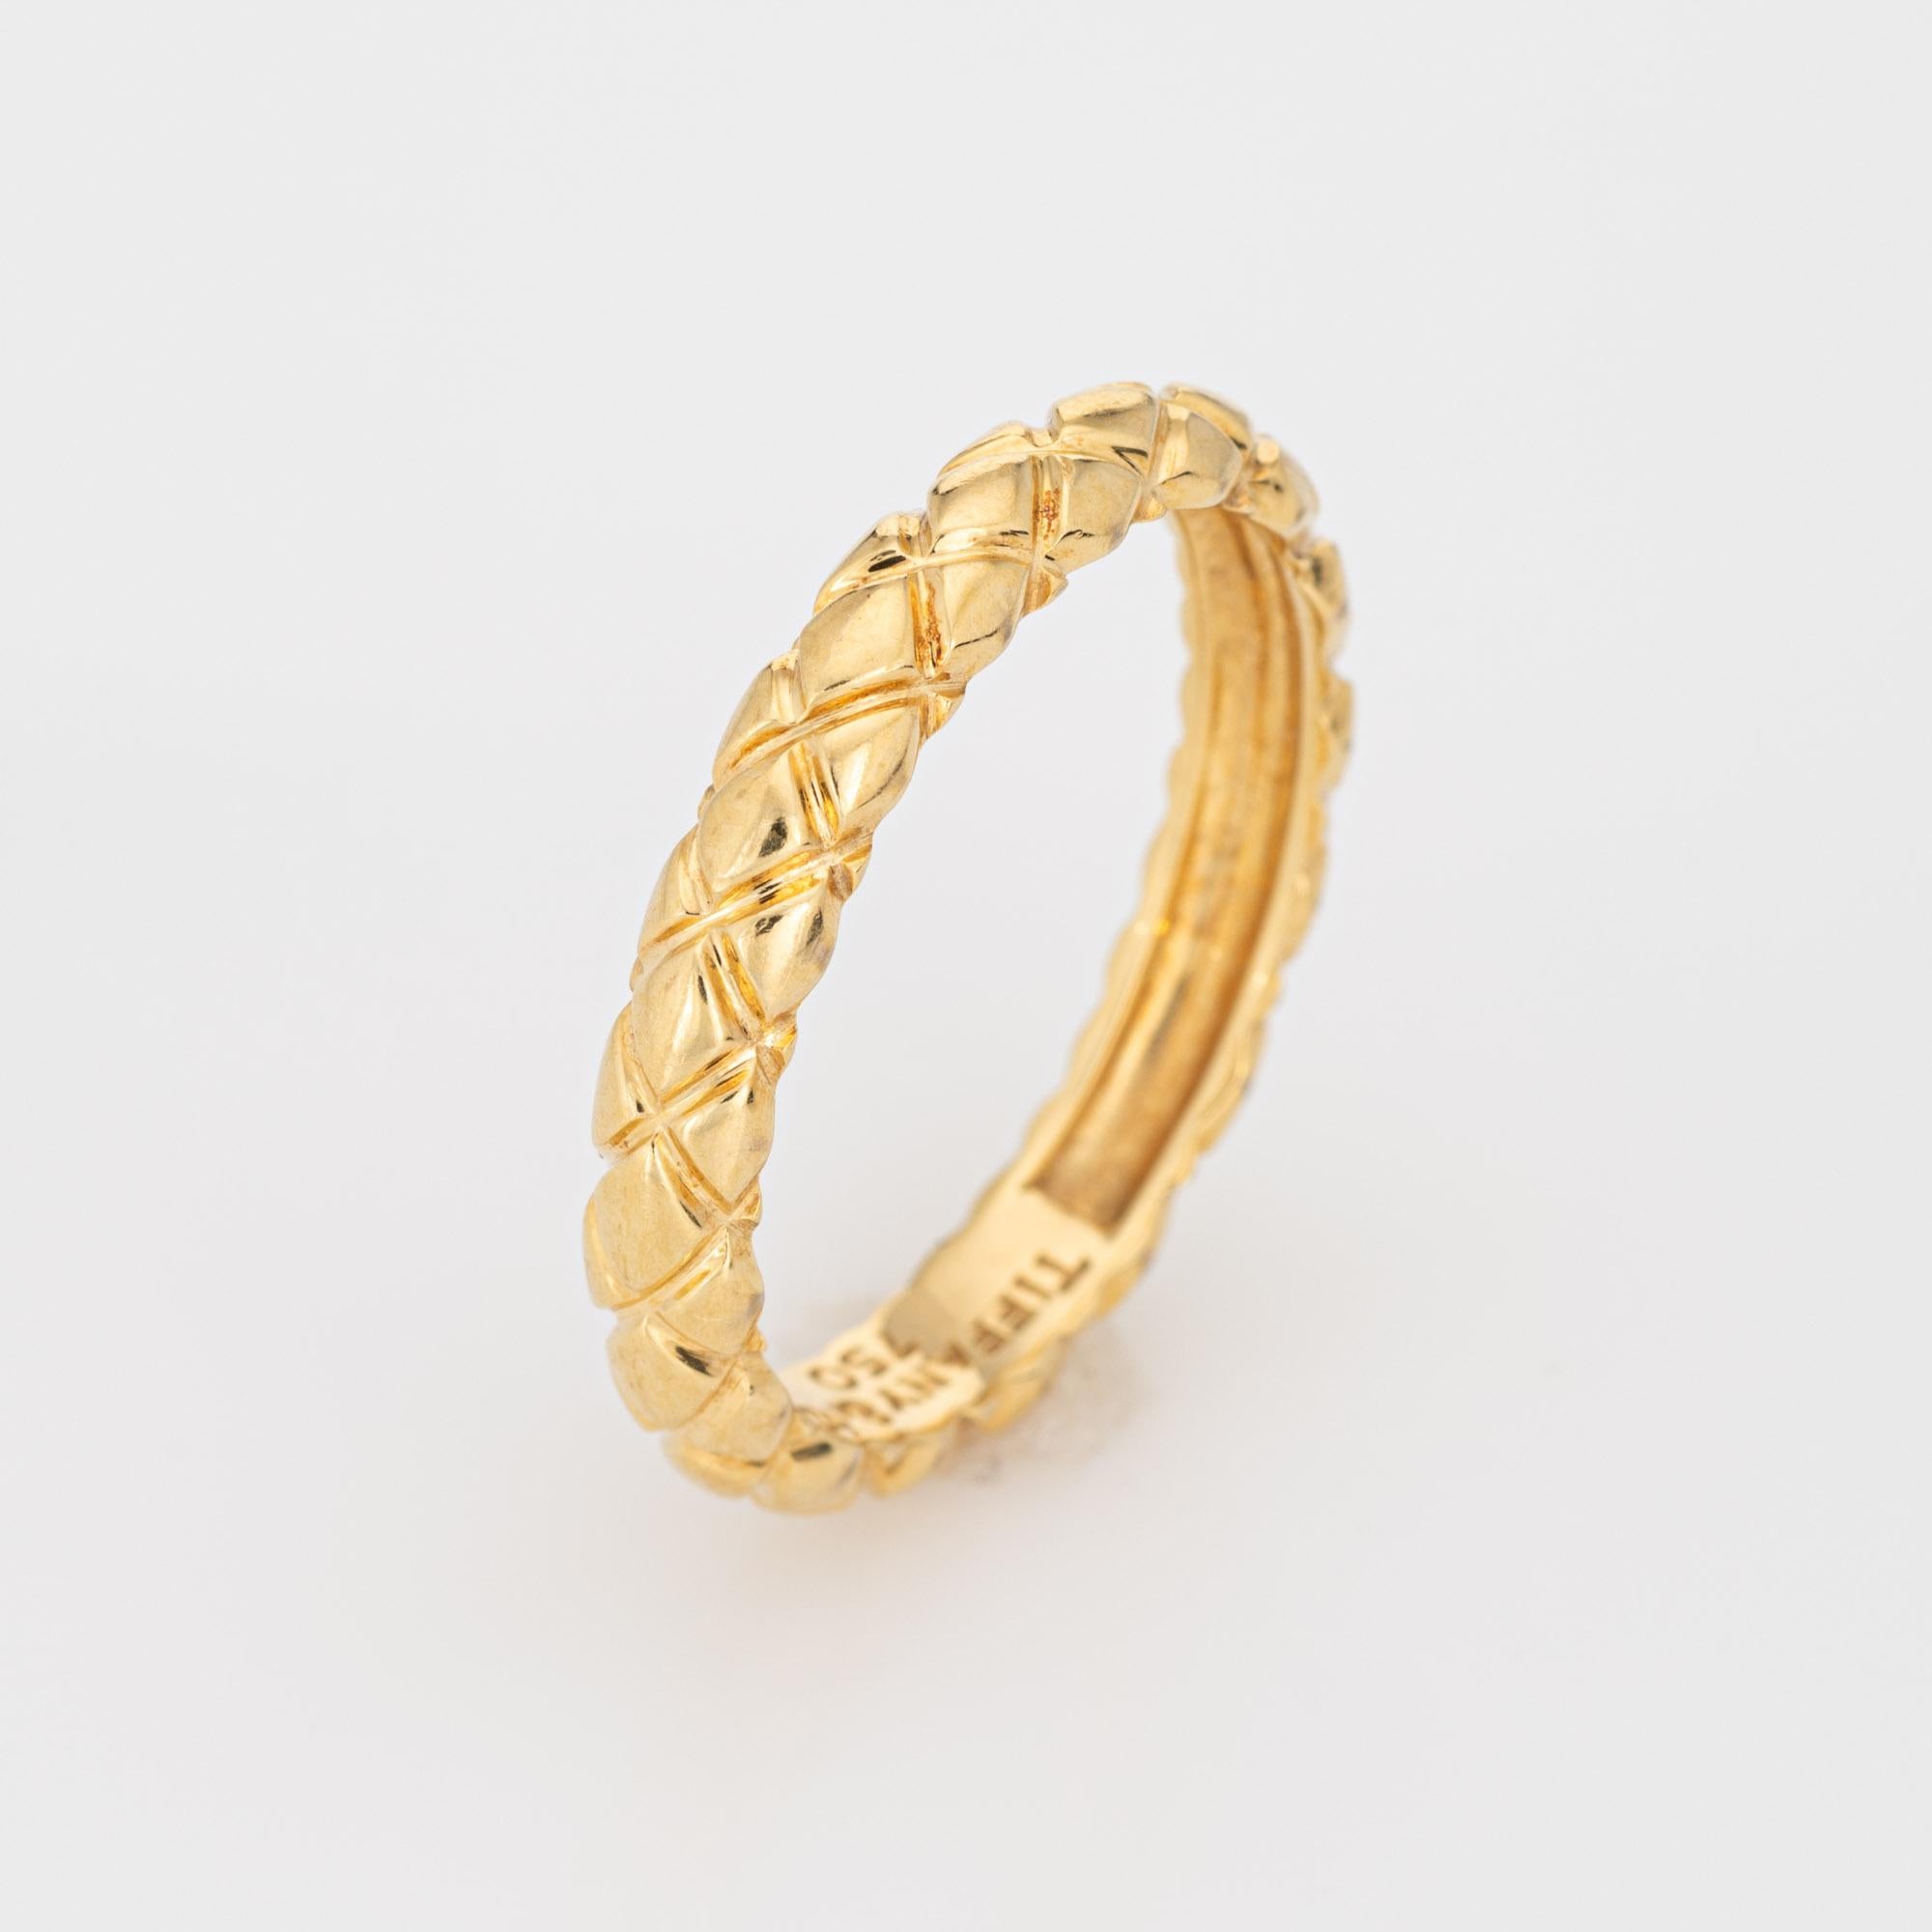 Finely detailed pre-owned Tiffany & Co quilt pattern band crafted in 18k yellow gold. 

The stylish ring features a quilt pattern around the entire band. The ring is great worn alone or stacked with your fine jewelry from any era. The ring is a